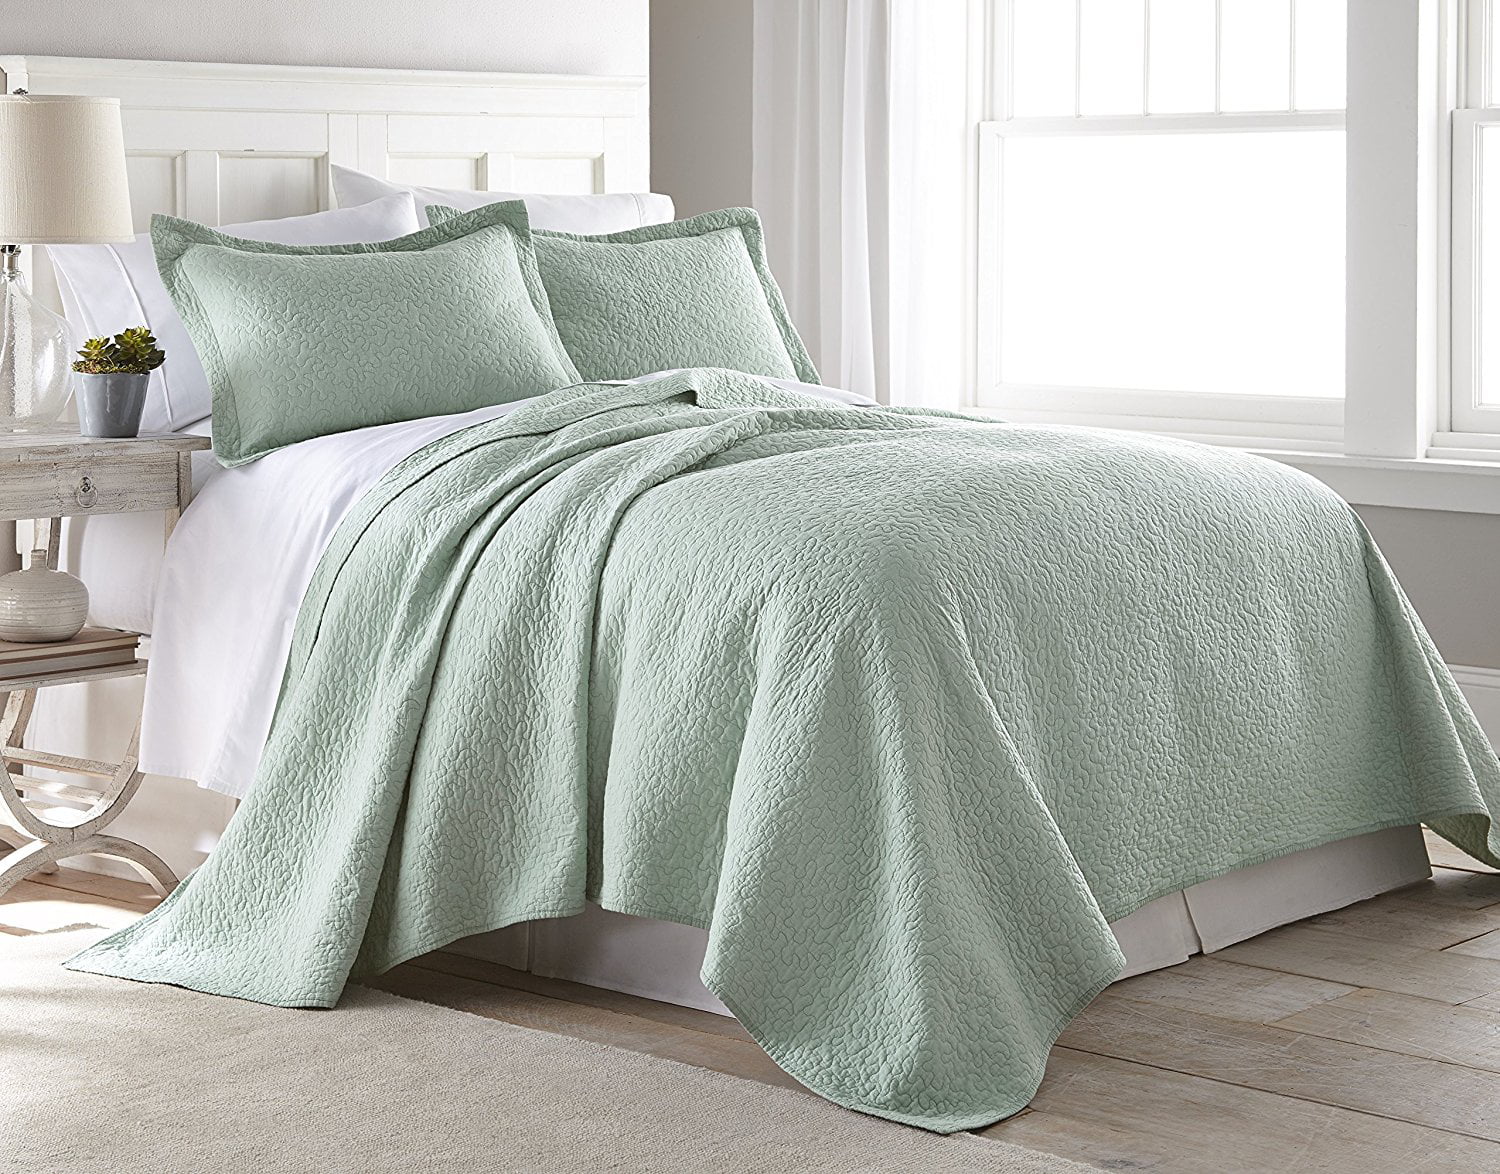 King, Seafoam Green Chezmoi Collection Katy 3-Piece Solid Raw Edge 100% Cotton Pre-Washed Soft-Finished Quilt Set